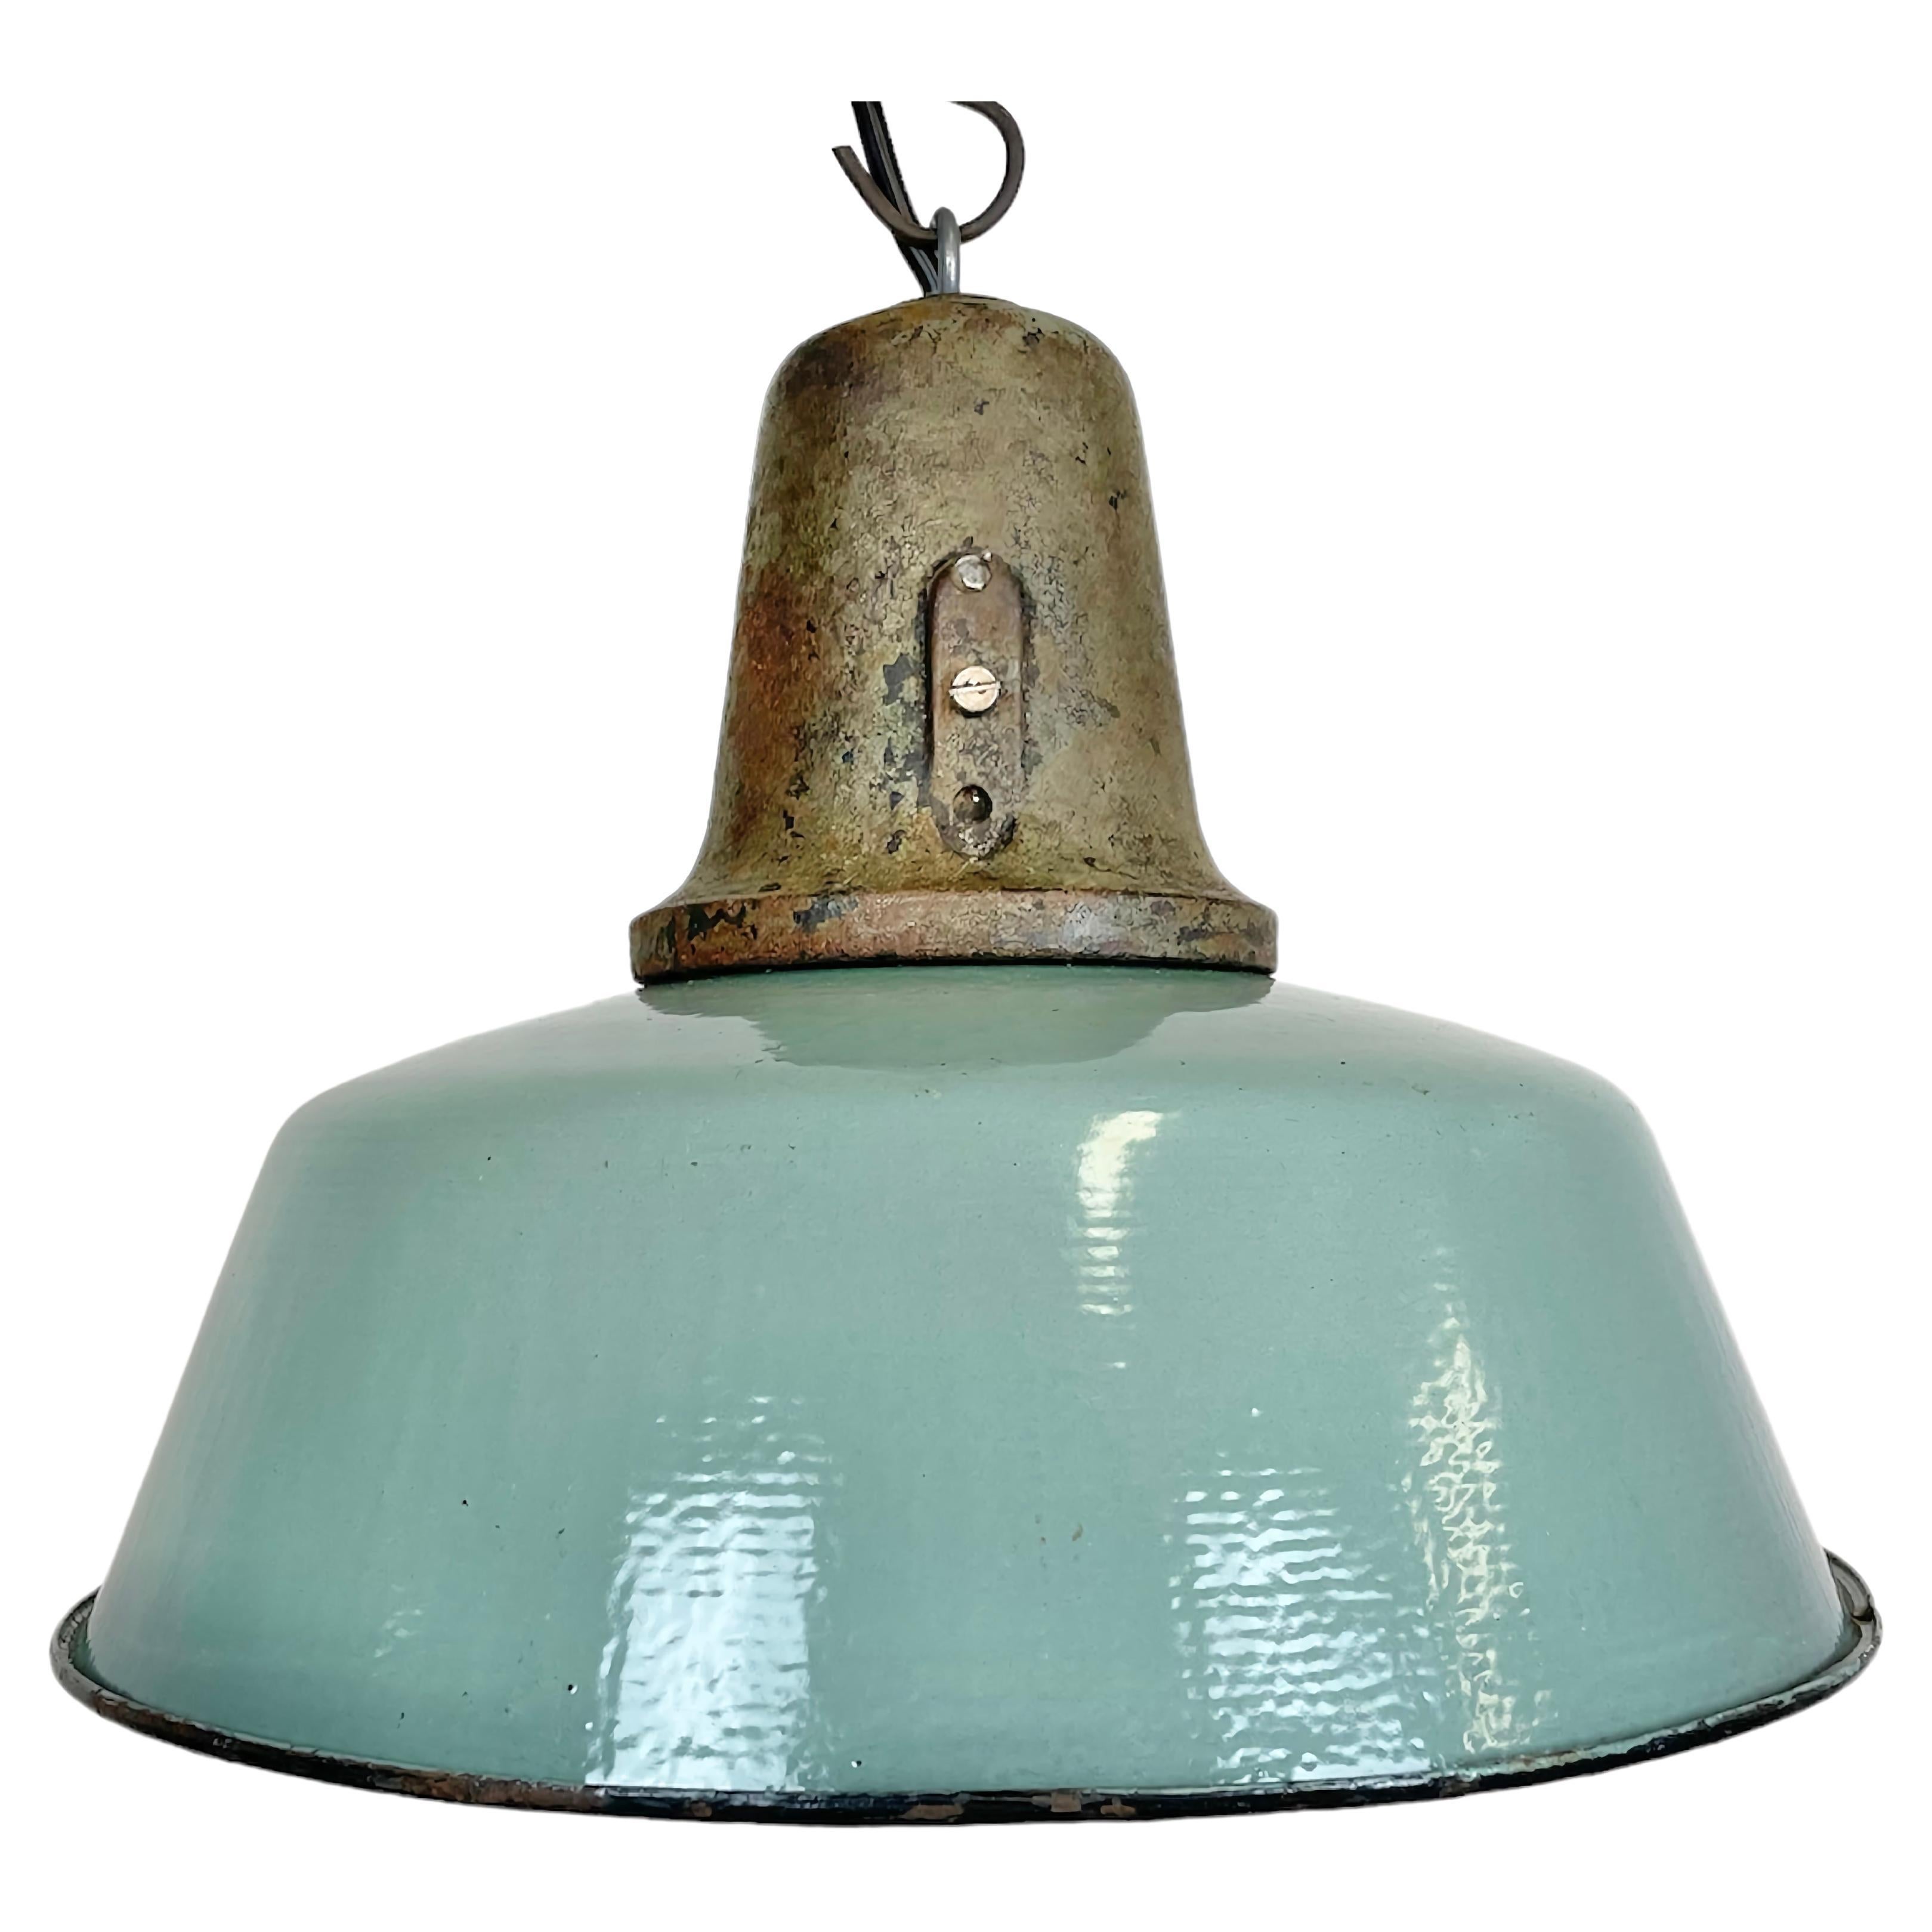 Industrial Petrol Enamel Factory Lamp with Cast Iron Top, 1960s For Sale